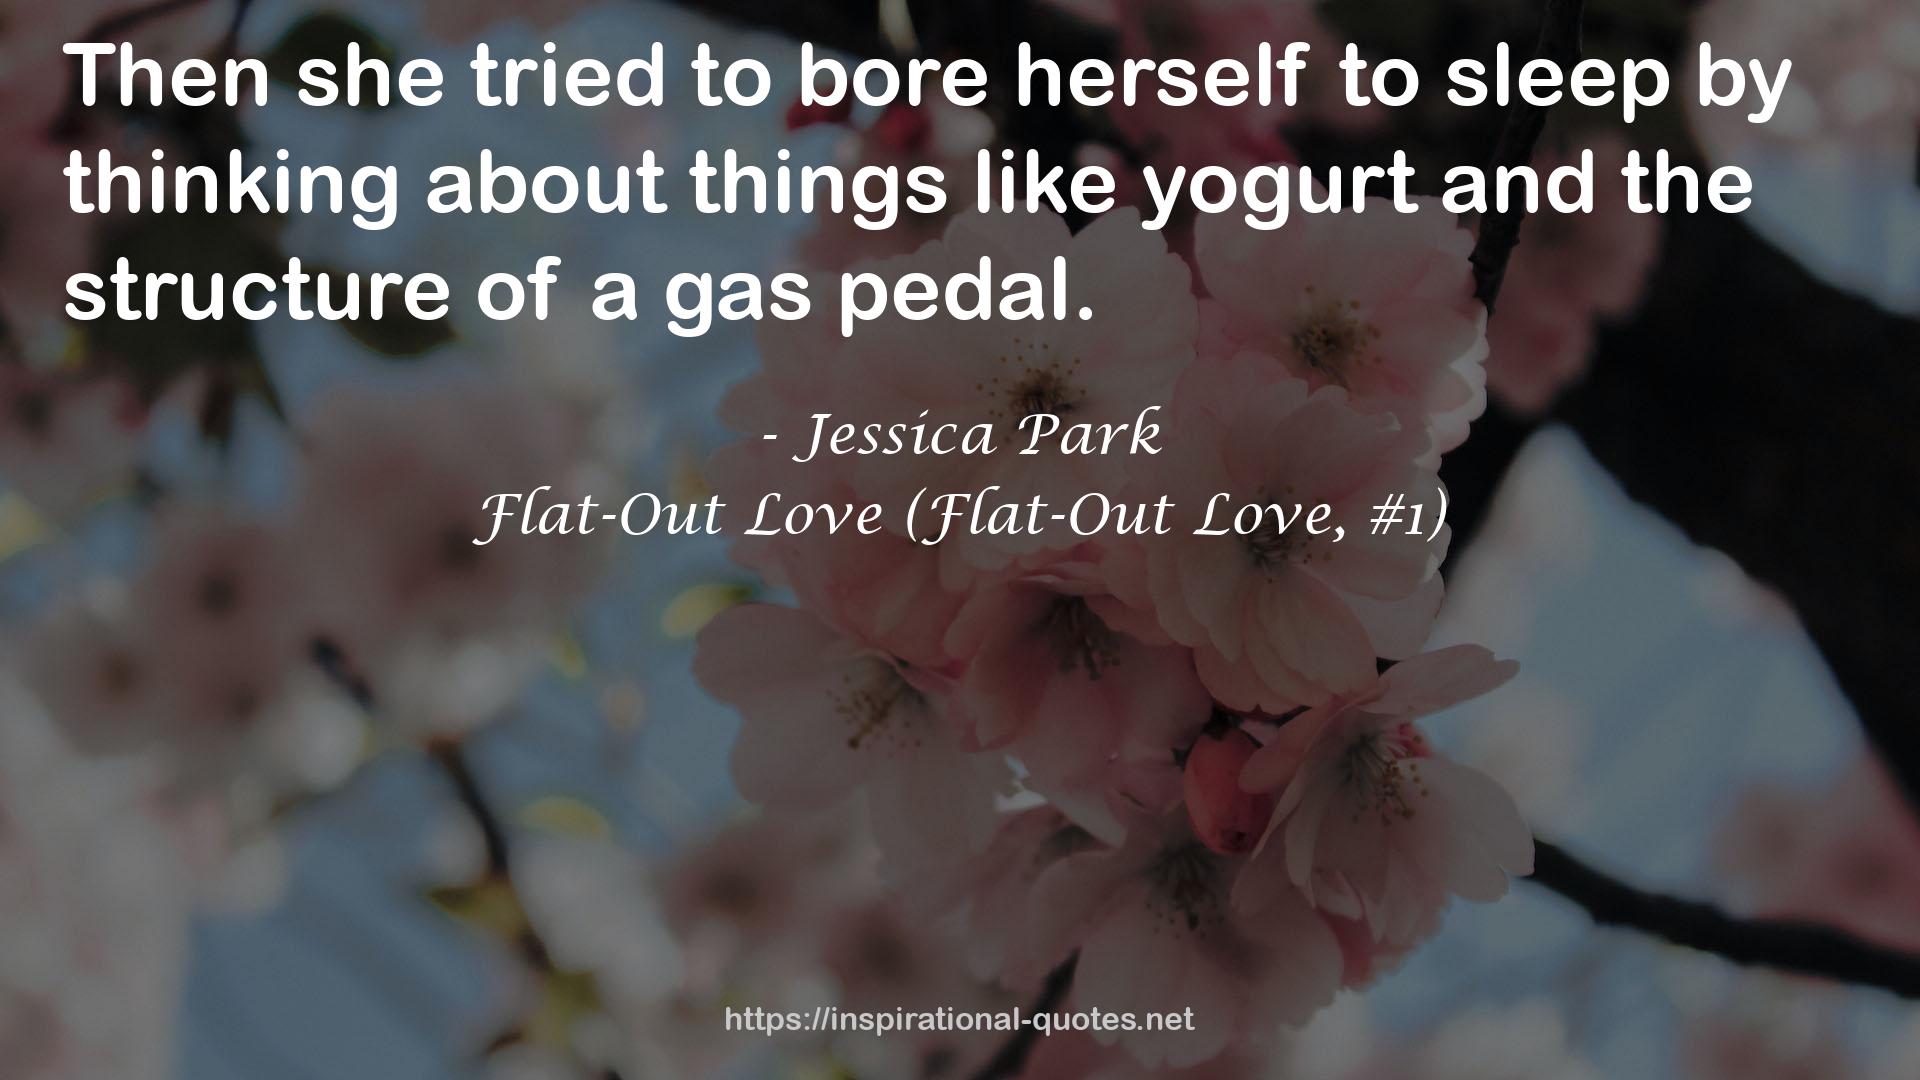 Flat-Out Love (Flat-Out Love, #1) QUOTES